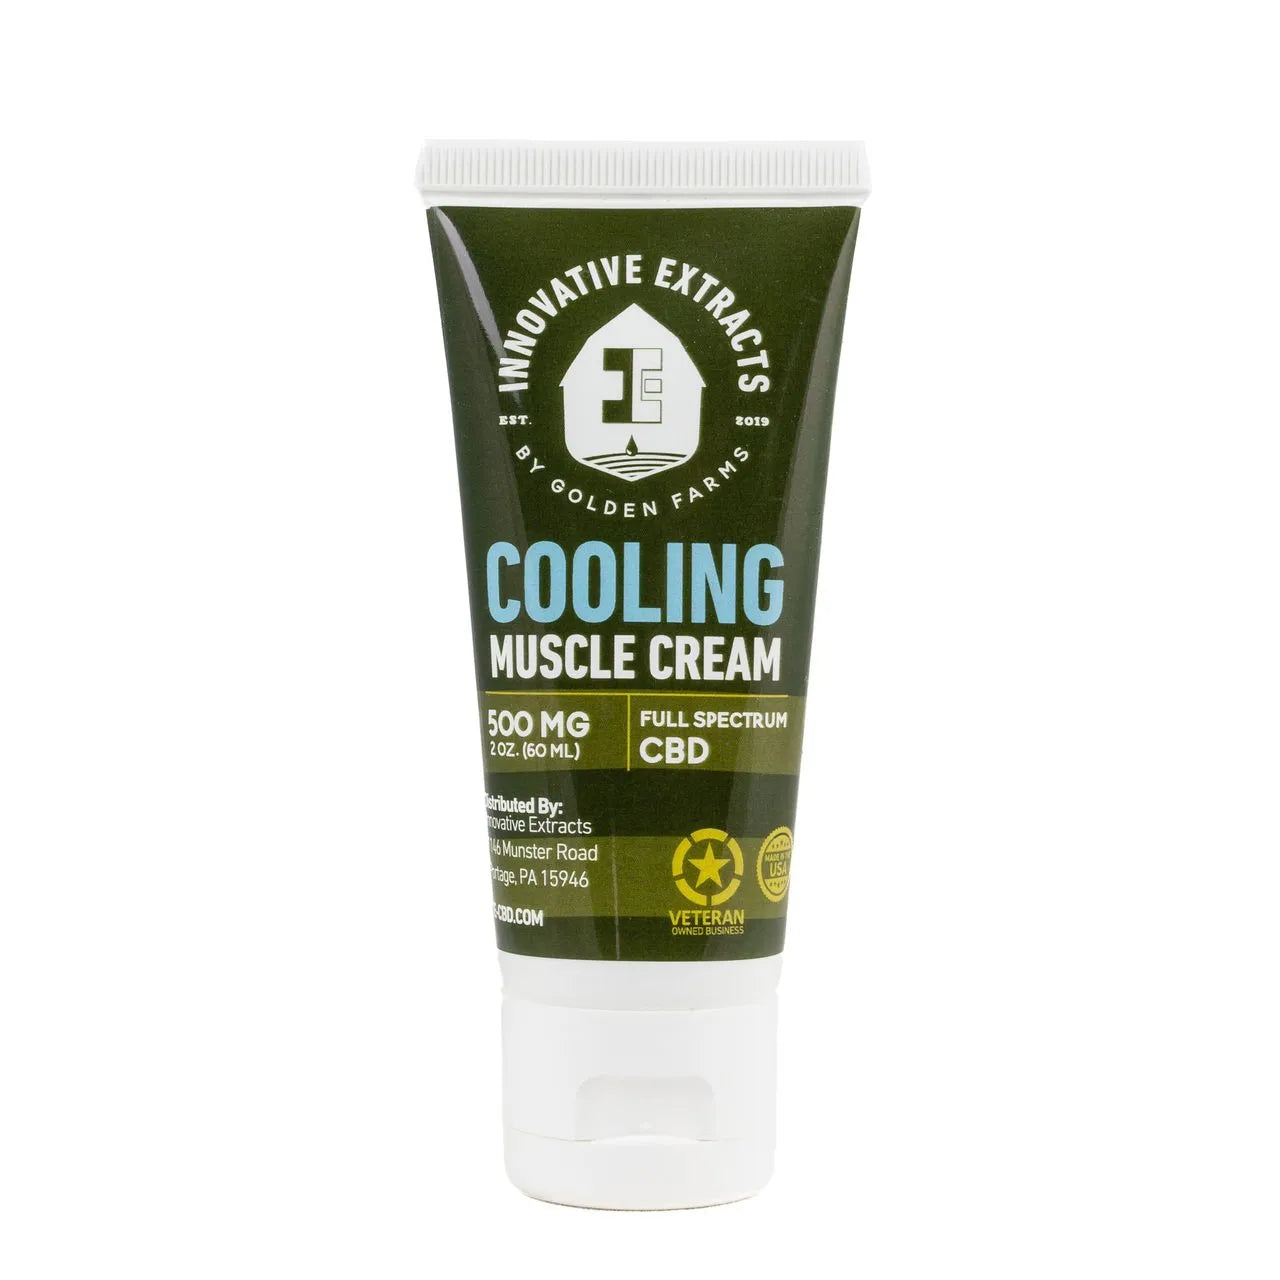 Muscle Cream – Cooling or Heating 500mg CBD